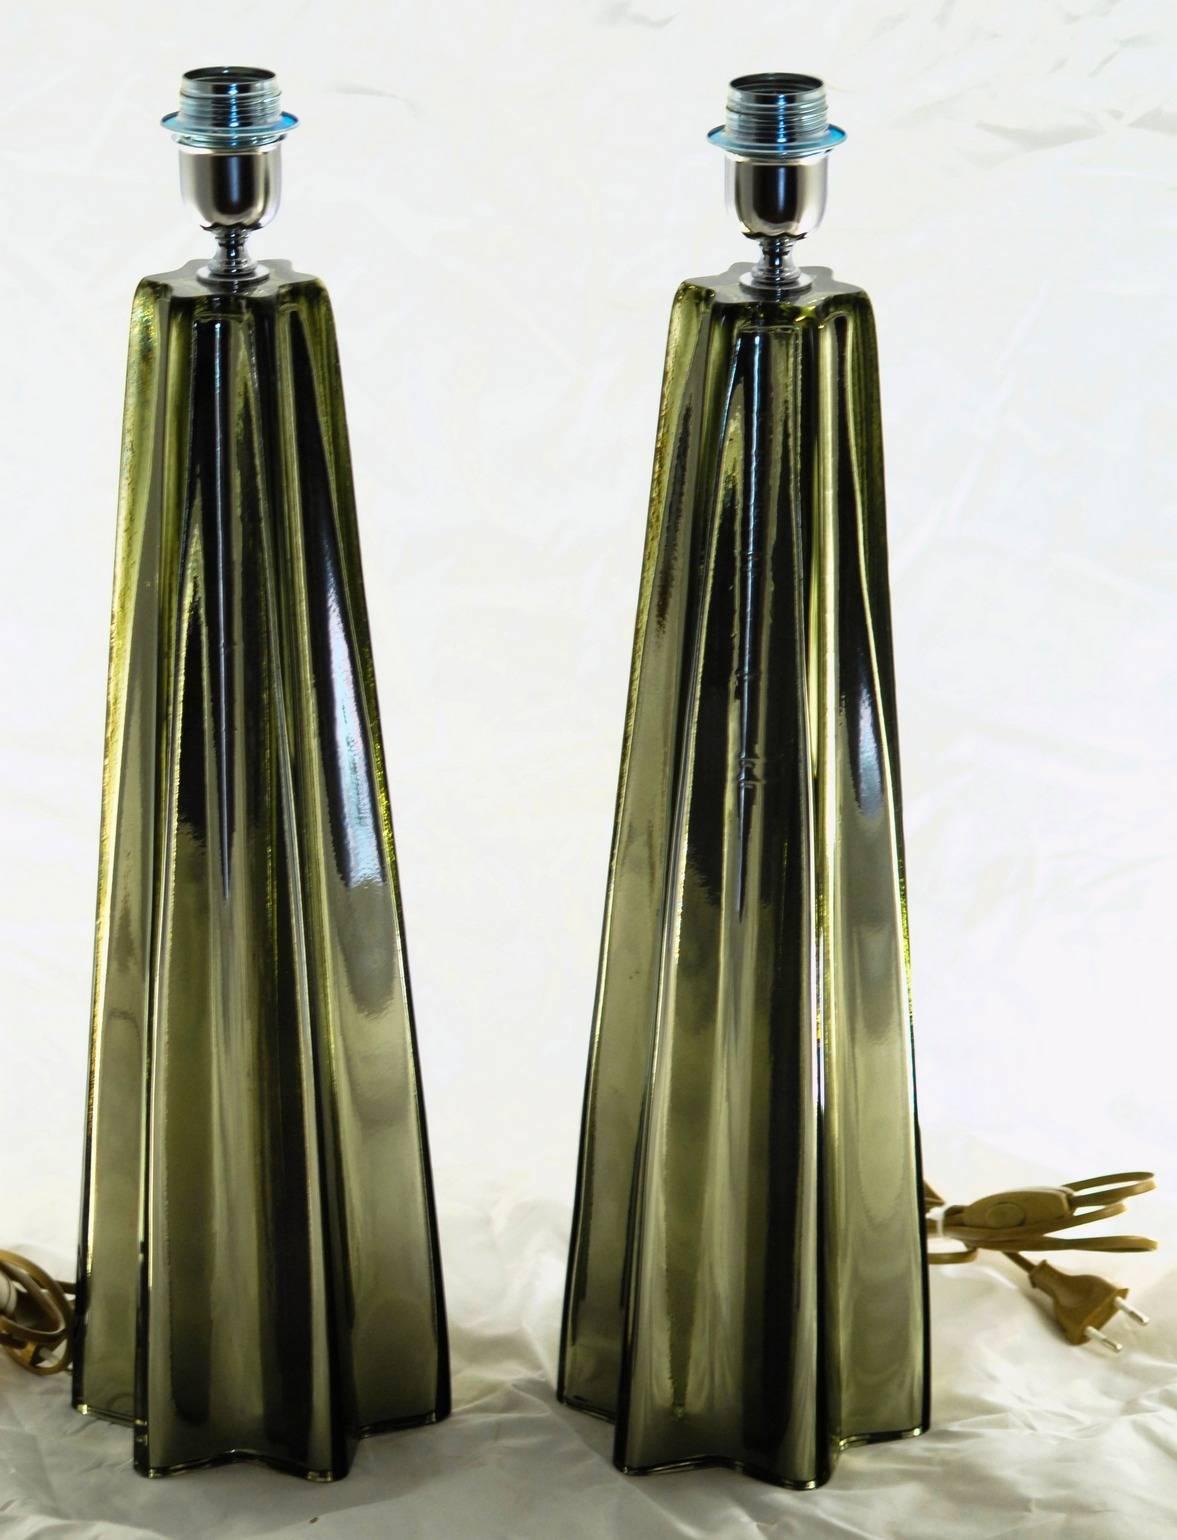 Fashionable pair of tall table lamp from Alberto Donà in Murano. Gray acciaio color layered inside with mirror mercury glass technique. Geometry of shape plays well with light reflection making a wonderful effect when the shaded lamp is lit.